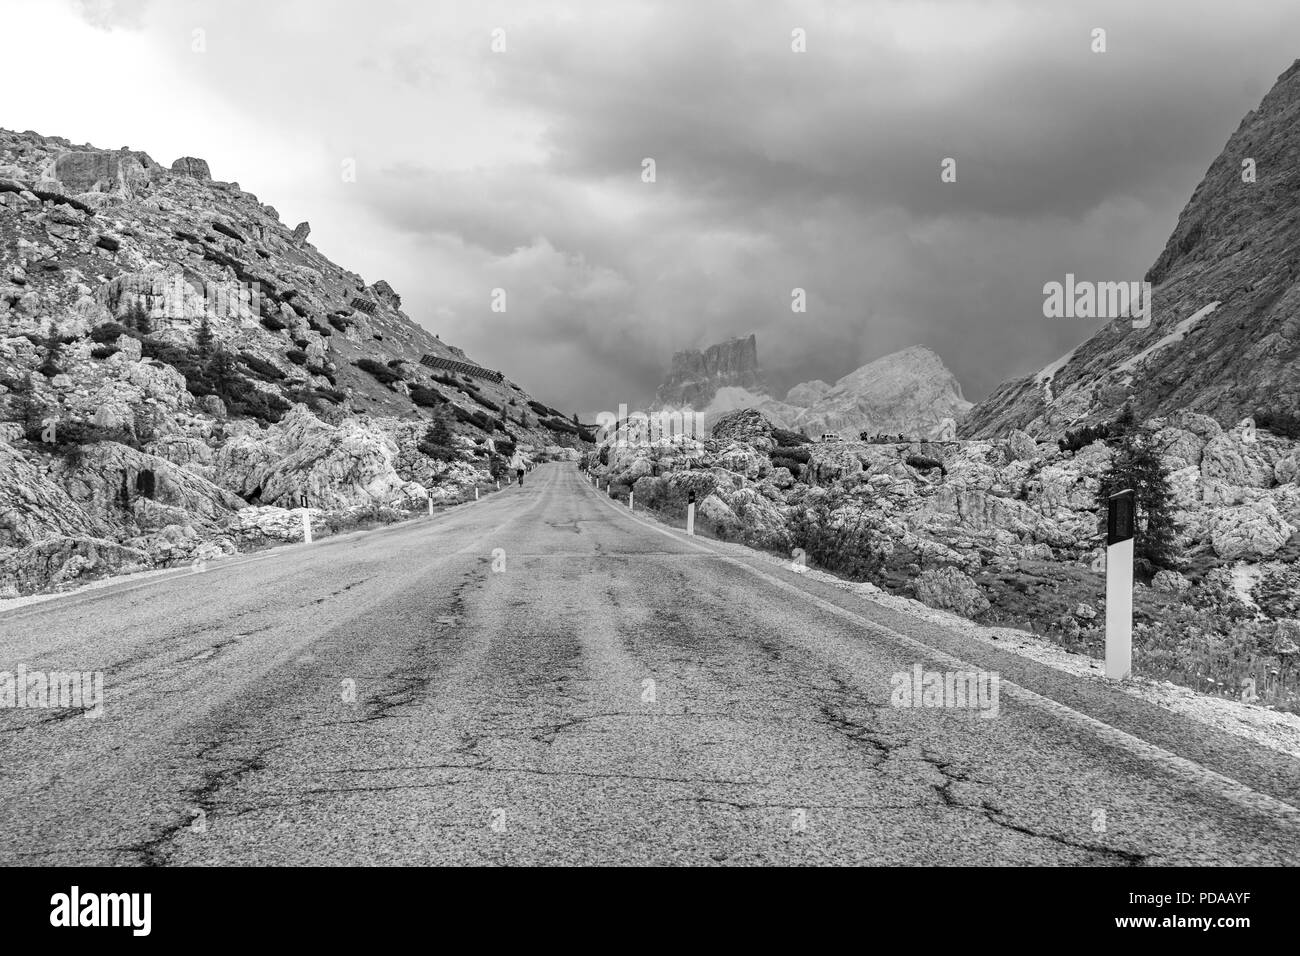 Empty deserted road in black and white leading to menacing stormy, cloudy mountains in the Dolomites, Italy Stock Photo